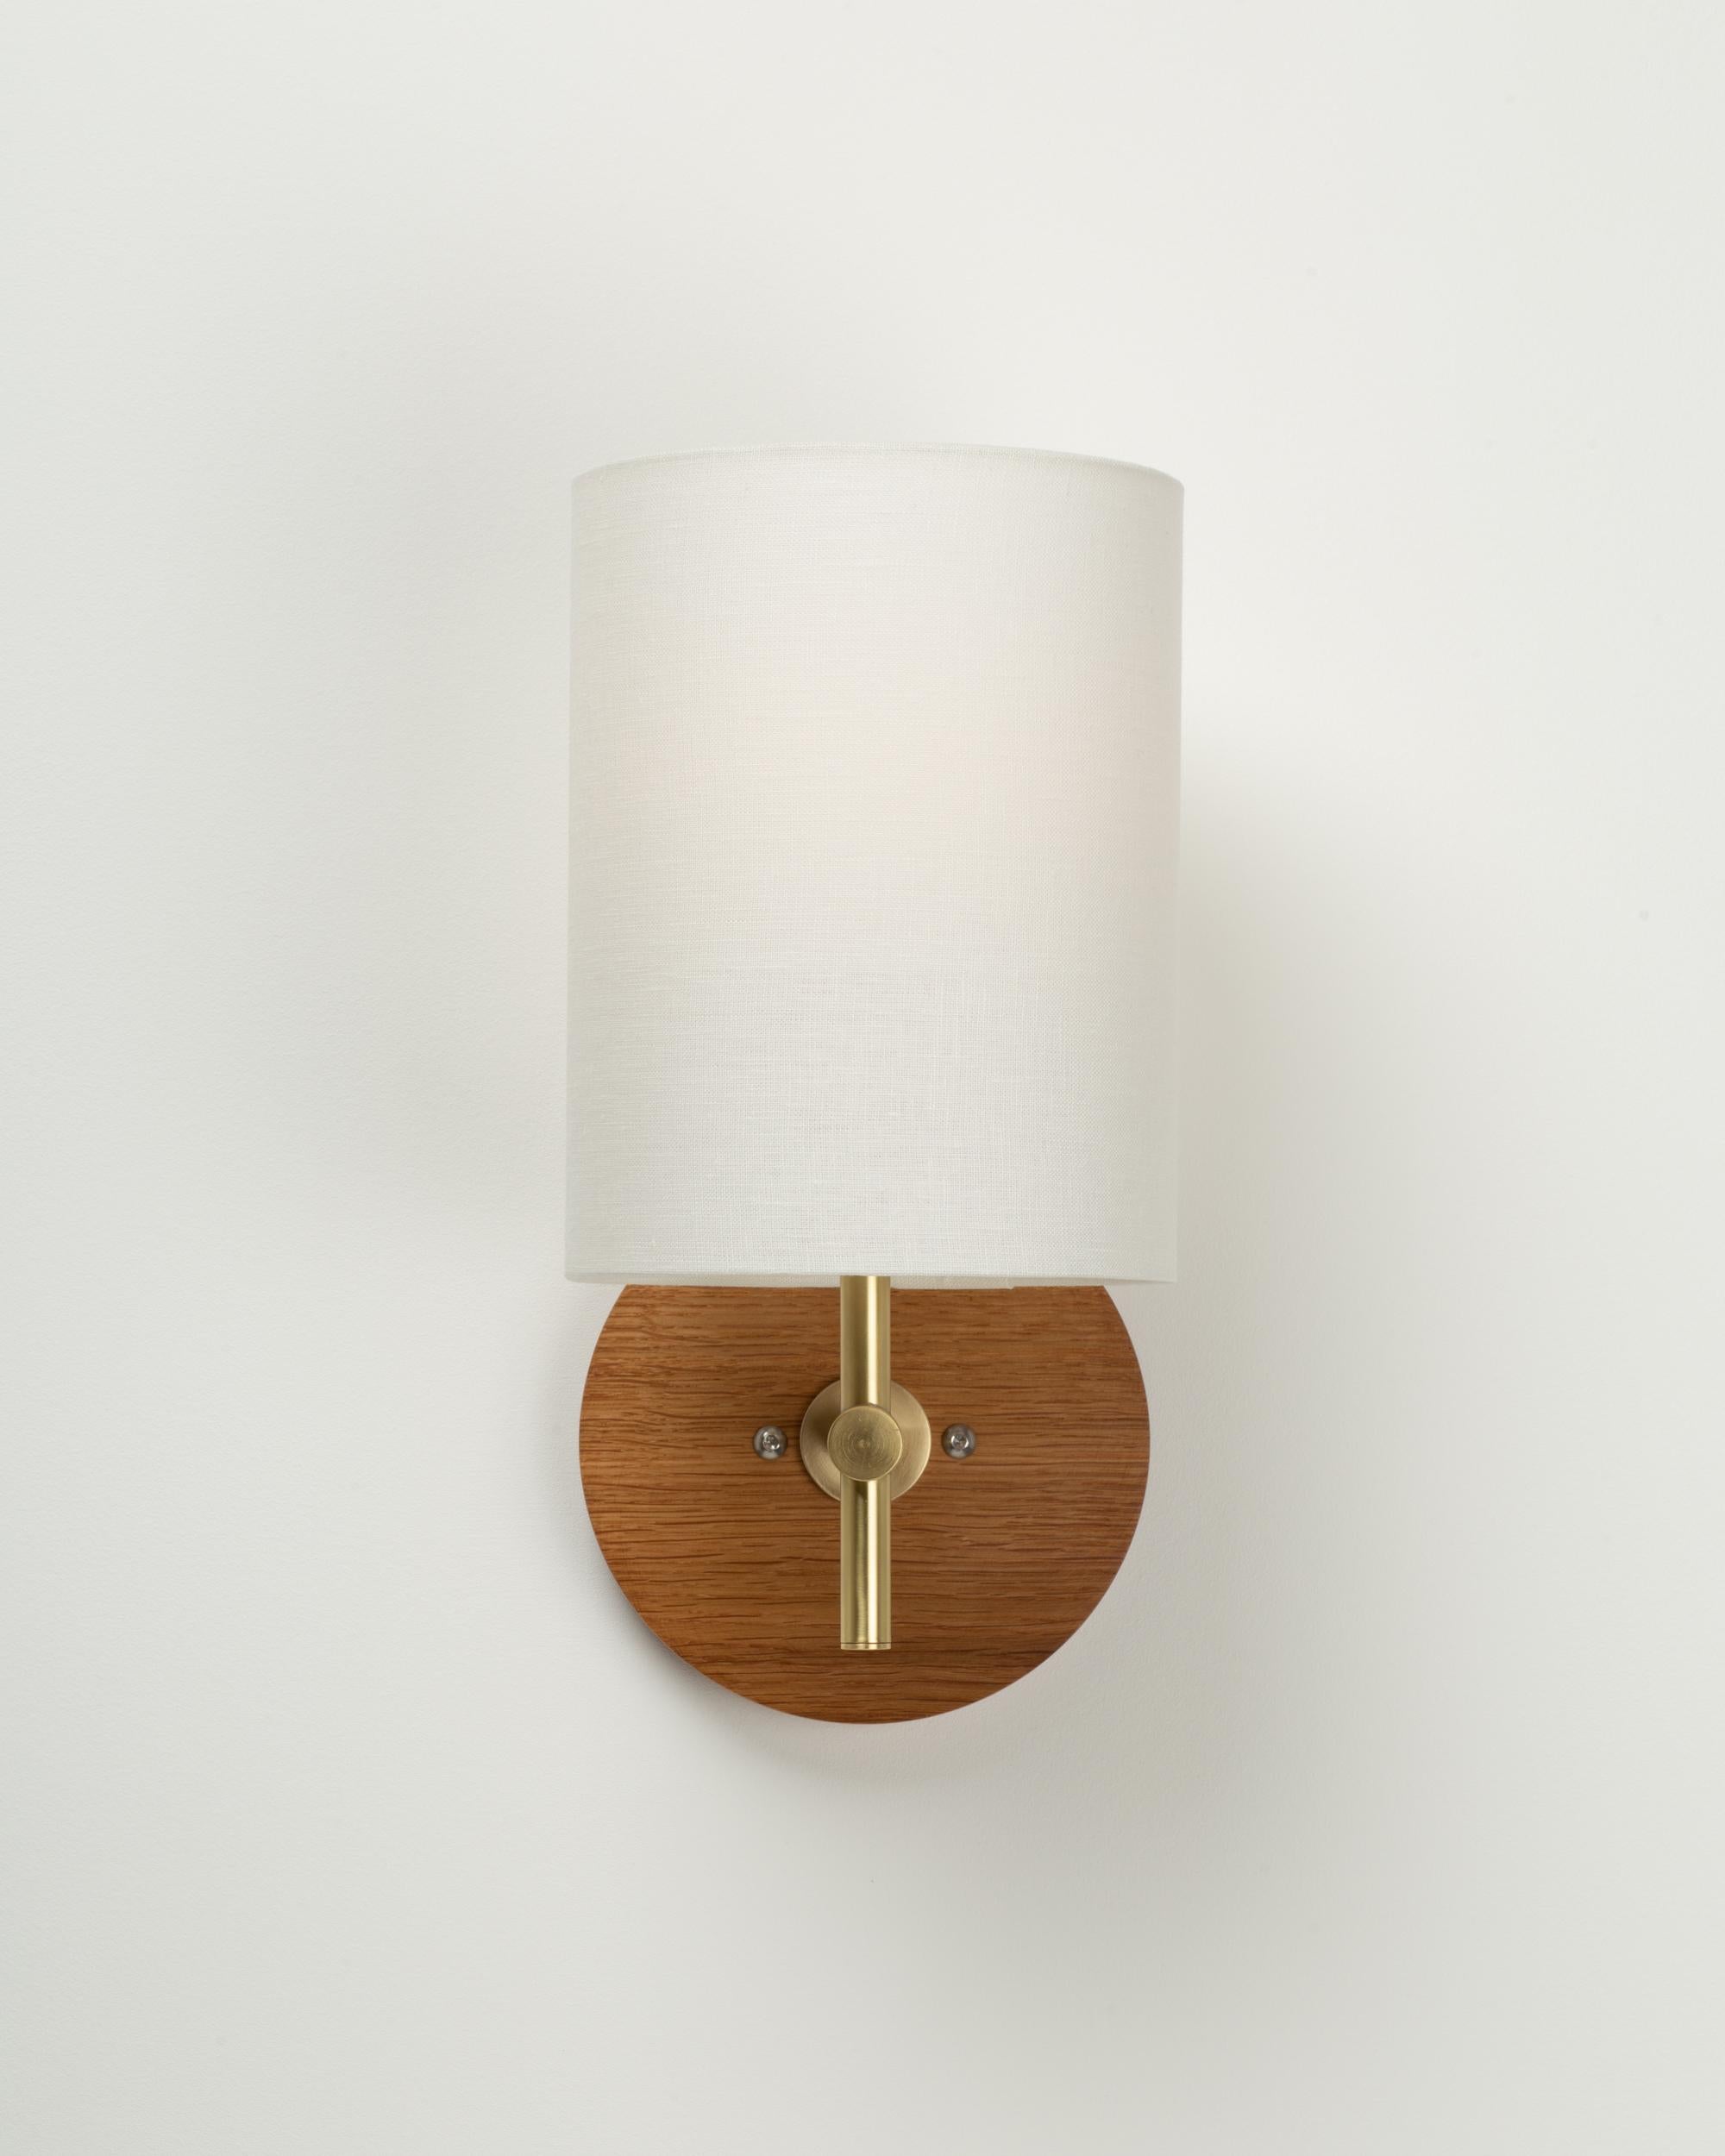 Linen Shade Wall Light 
Oak Wall Flush Mount Disc
2000K - 2800K  95CRI
600 Dim to Warm Lumens 
Hard Wired
Sphere III Bulb Included
Custom Linen Shade Colours available on request. 
Satin Silk Colours also available. 
Smoked Oak available on request.